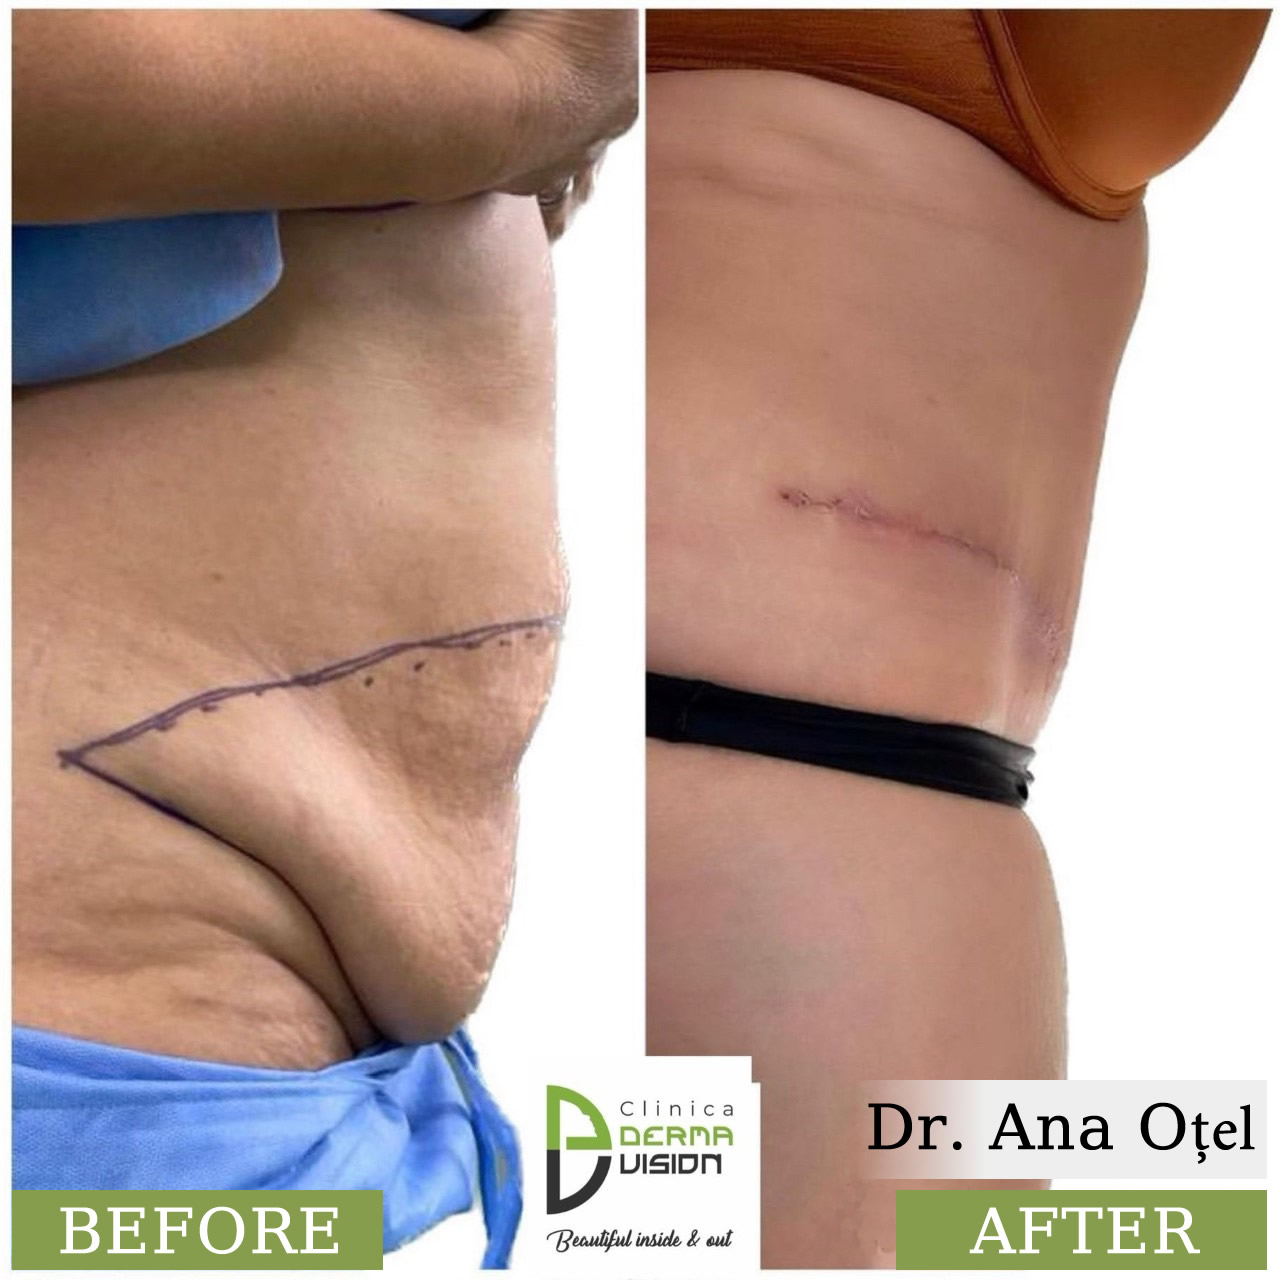 before-after2 Abdominoplastia